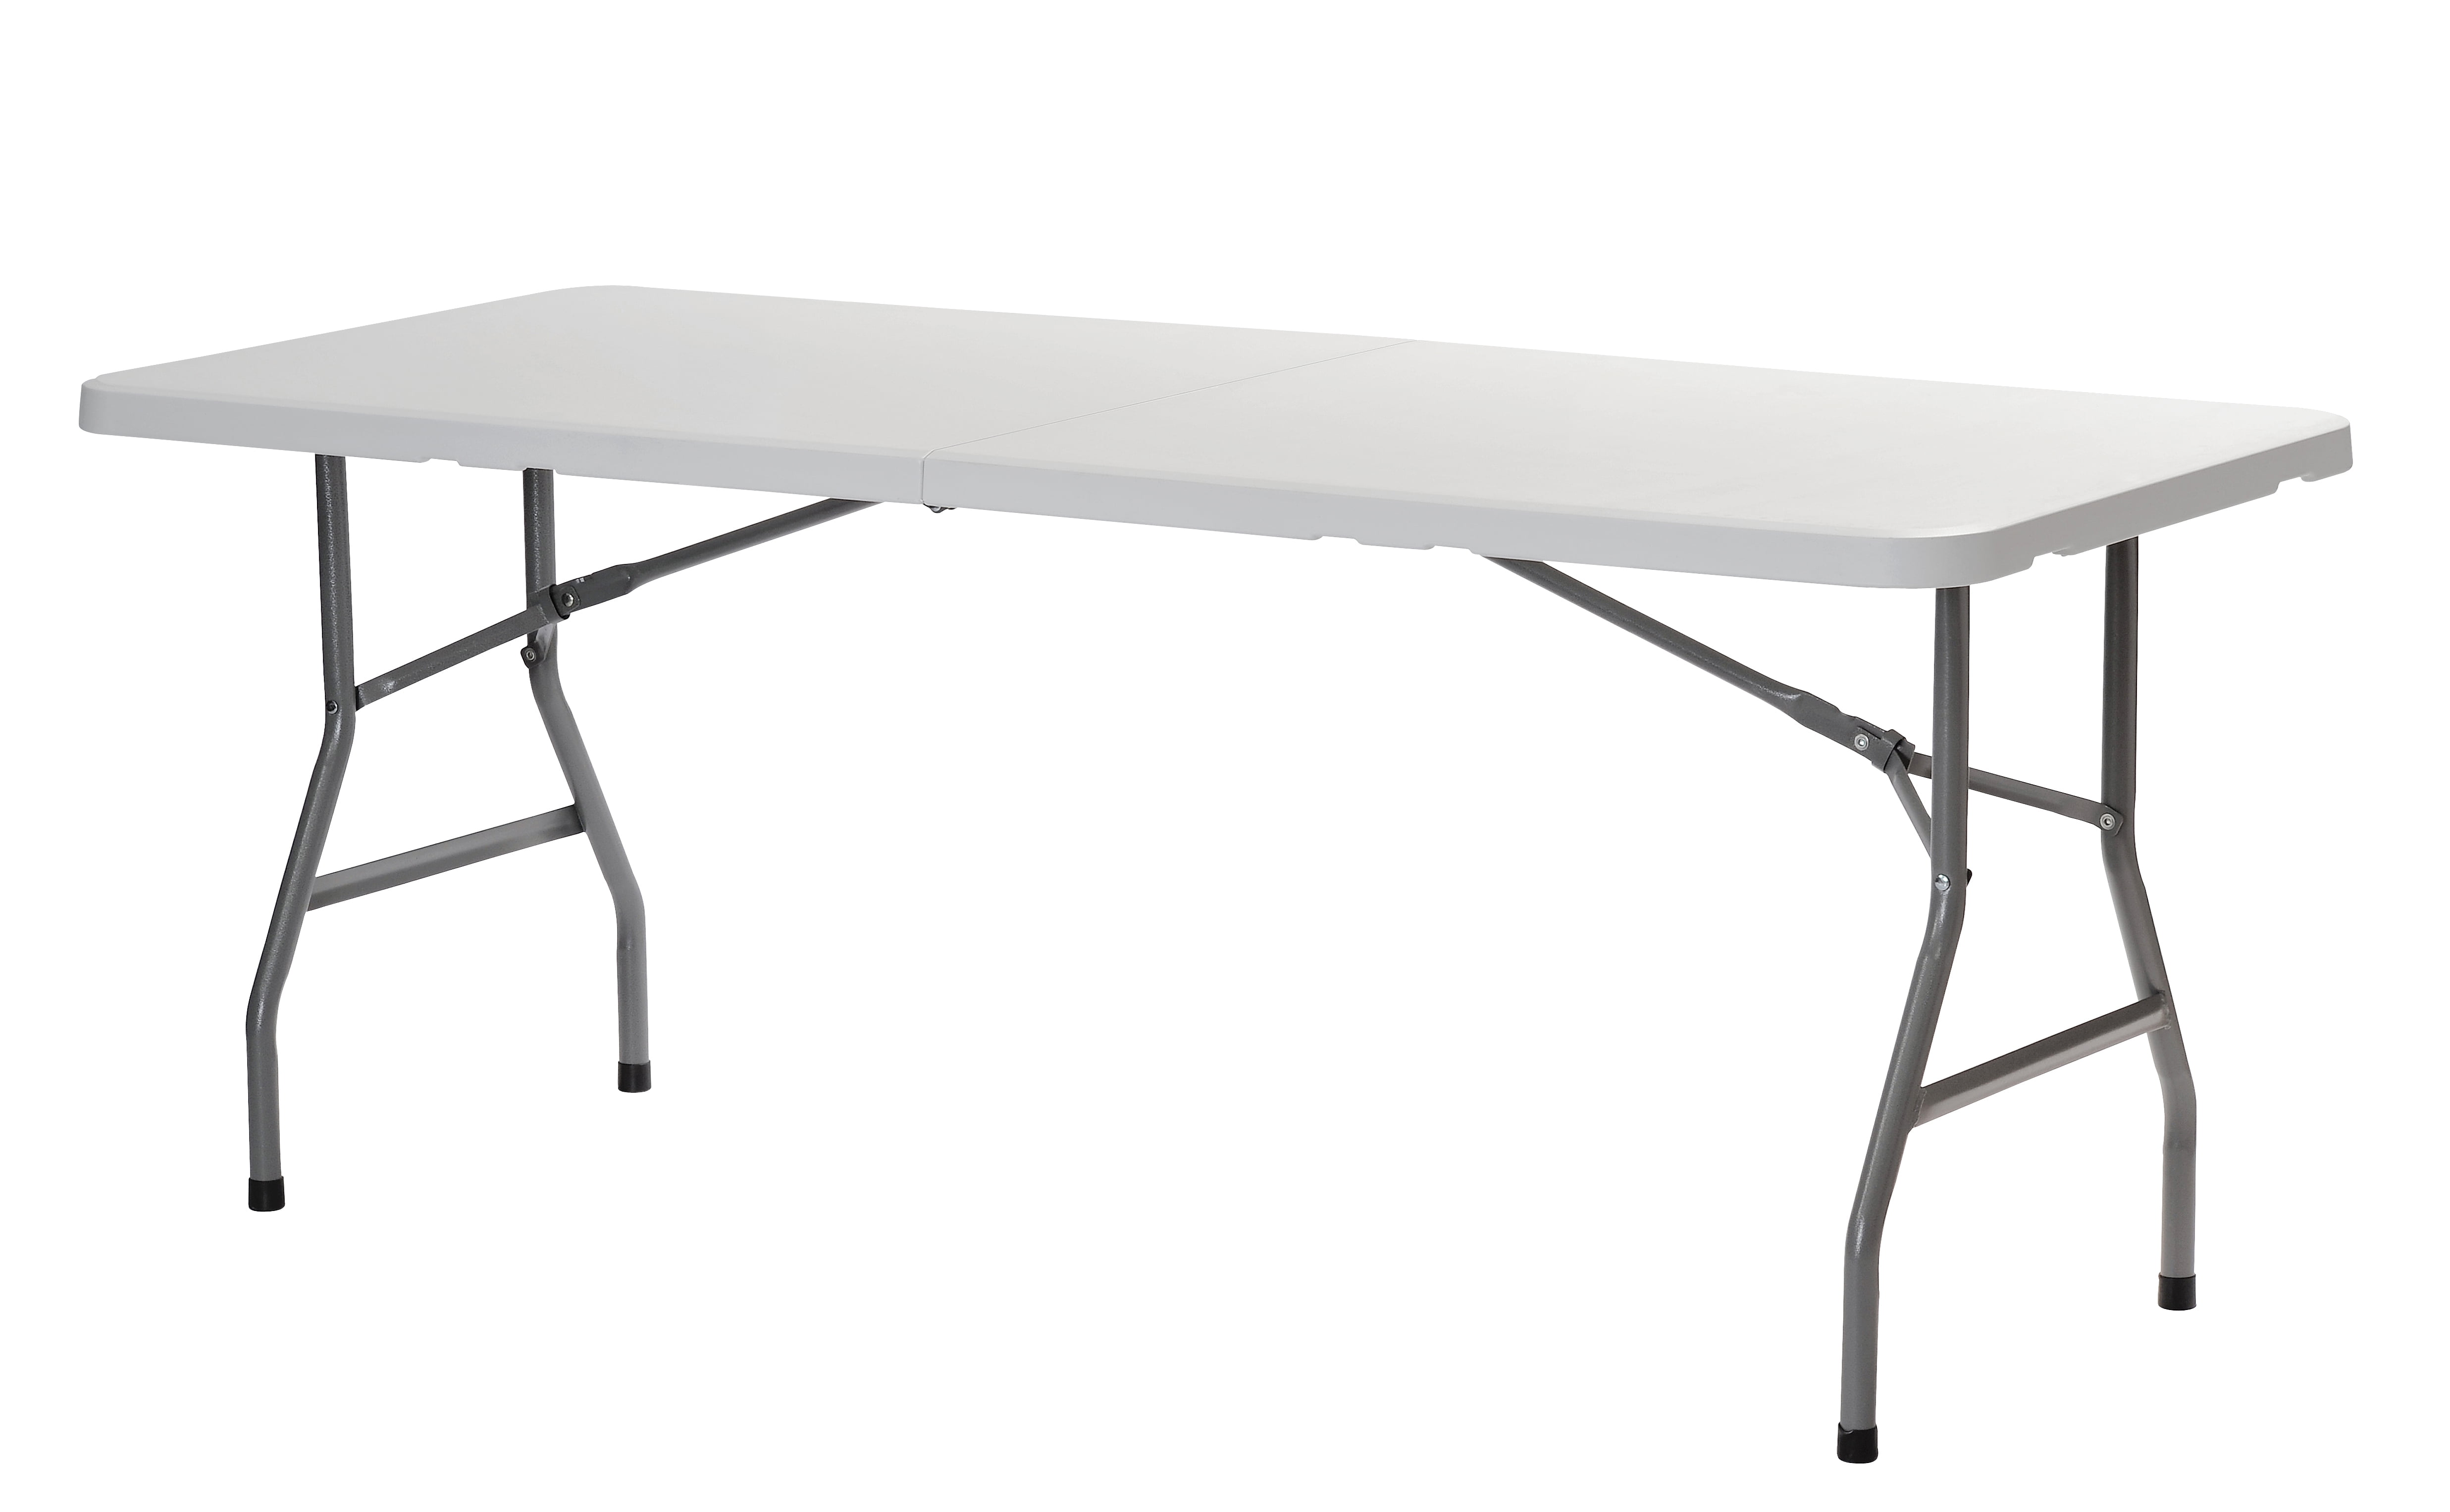 hceap plastic kitchen table from walmart